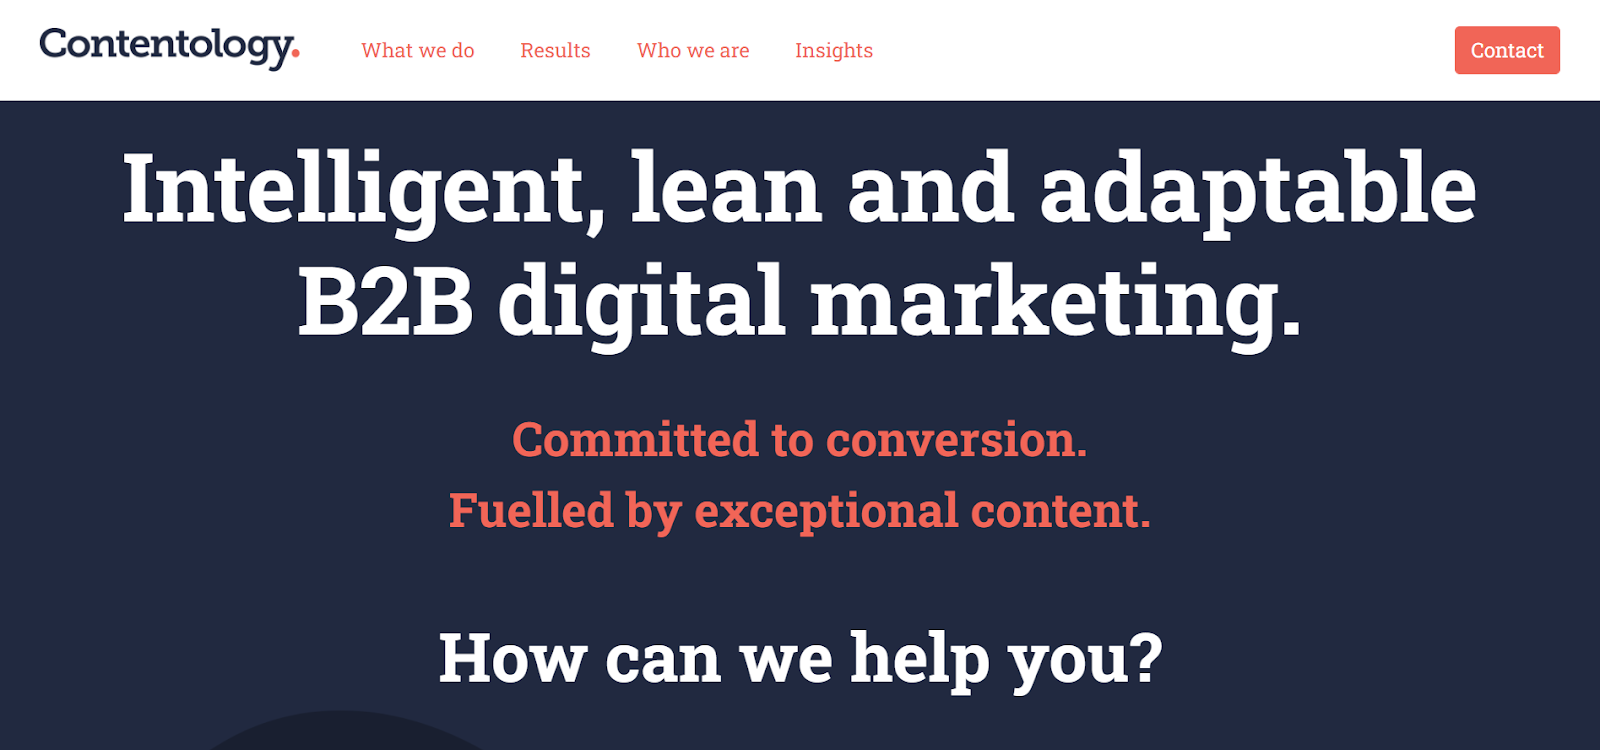 Manchester based B2B Advertising Agency - Contentology